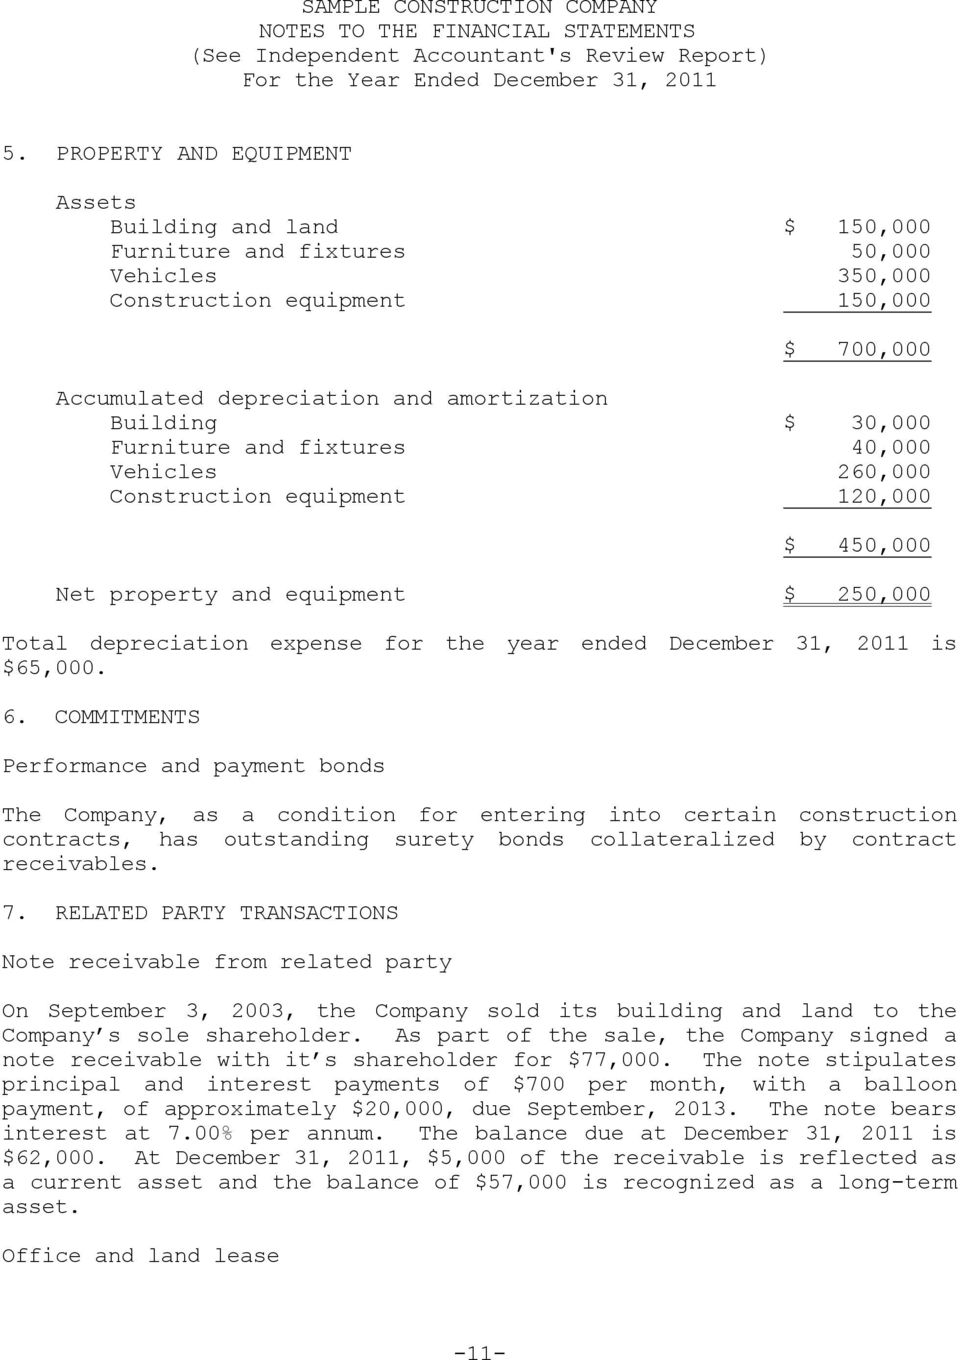 30,000 Furniture and fixtures 40,000 Vehicles 260,000 Construction equipment 120,000 $ 450,000 Net property and equipment $ 250,000 Total depreciation expense for the year ended December 31, 2011 is